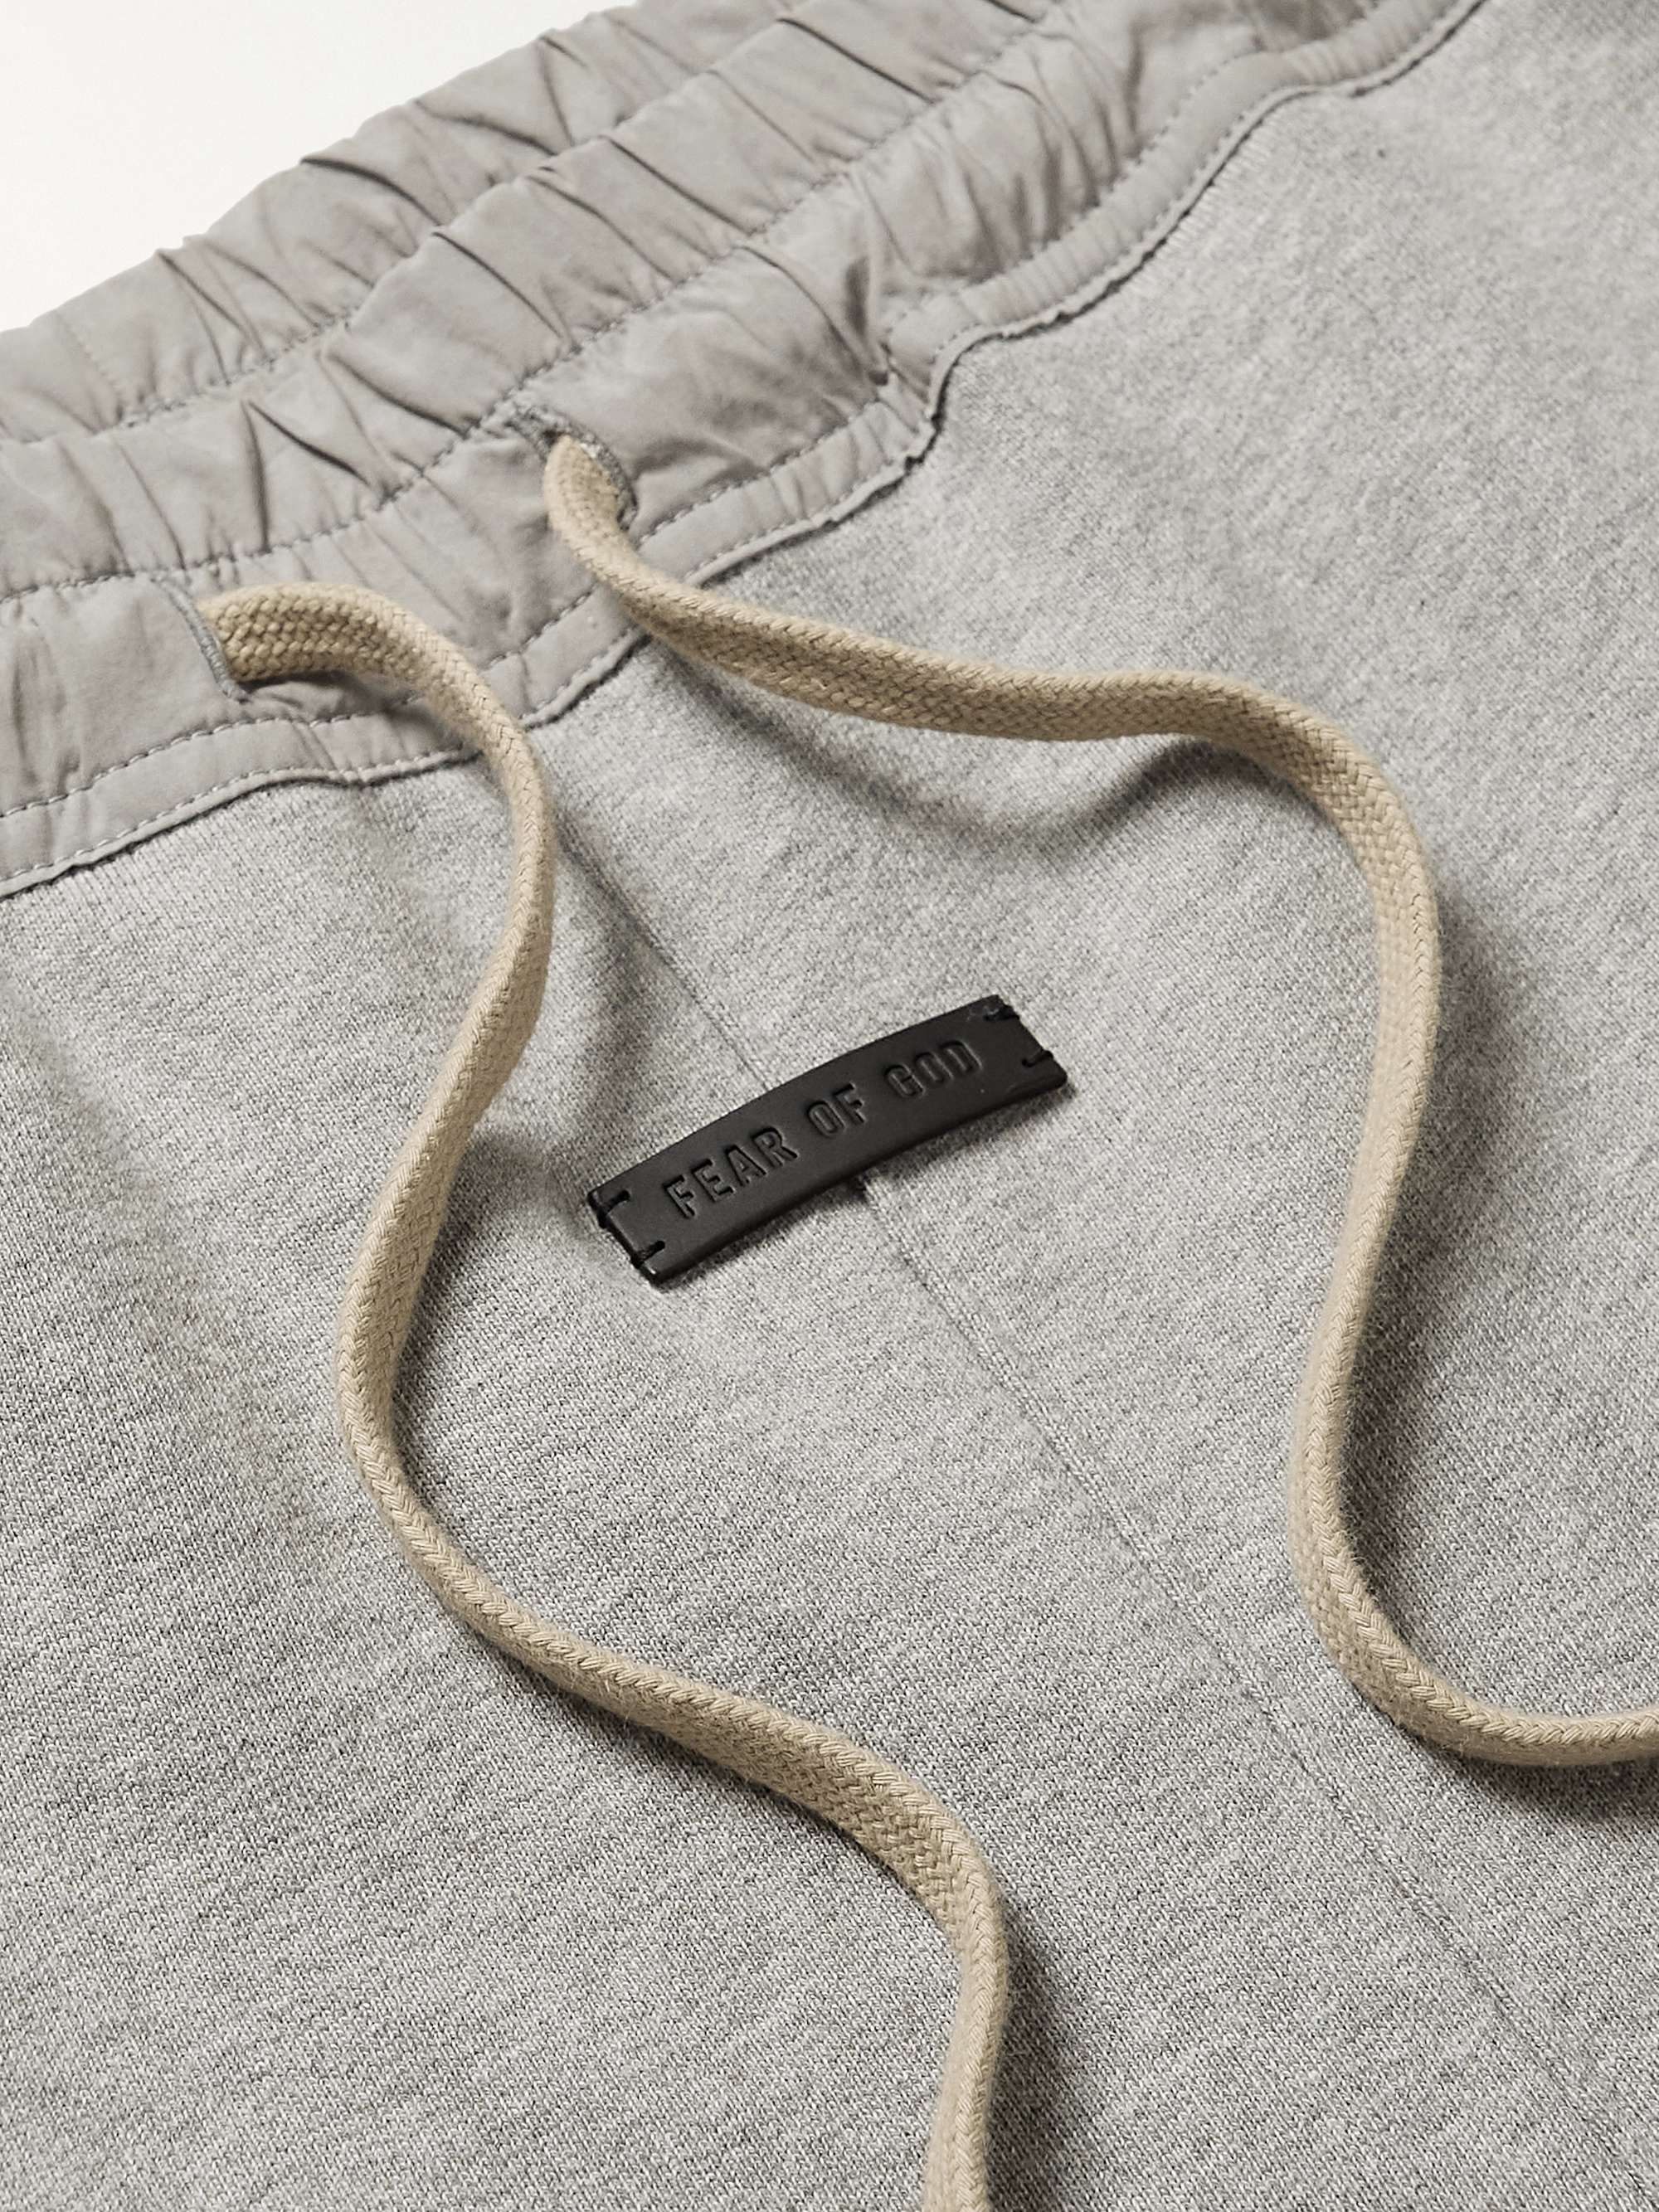 FEAR OF GOD The Vintage Tapered Cotton-Jersey Sweatpants